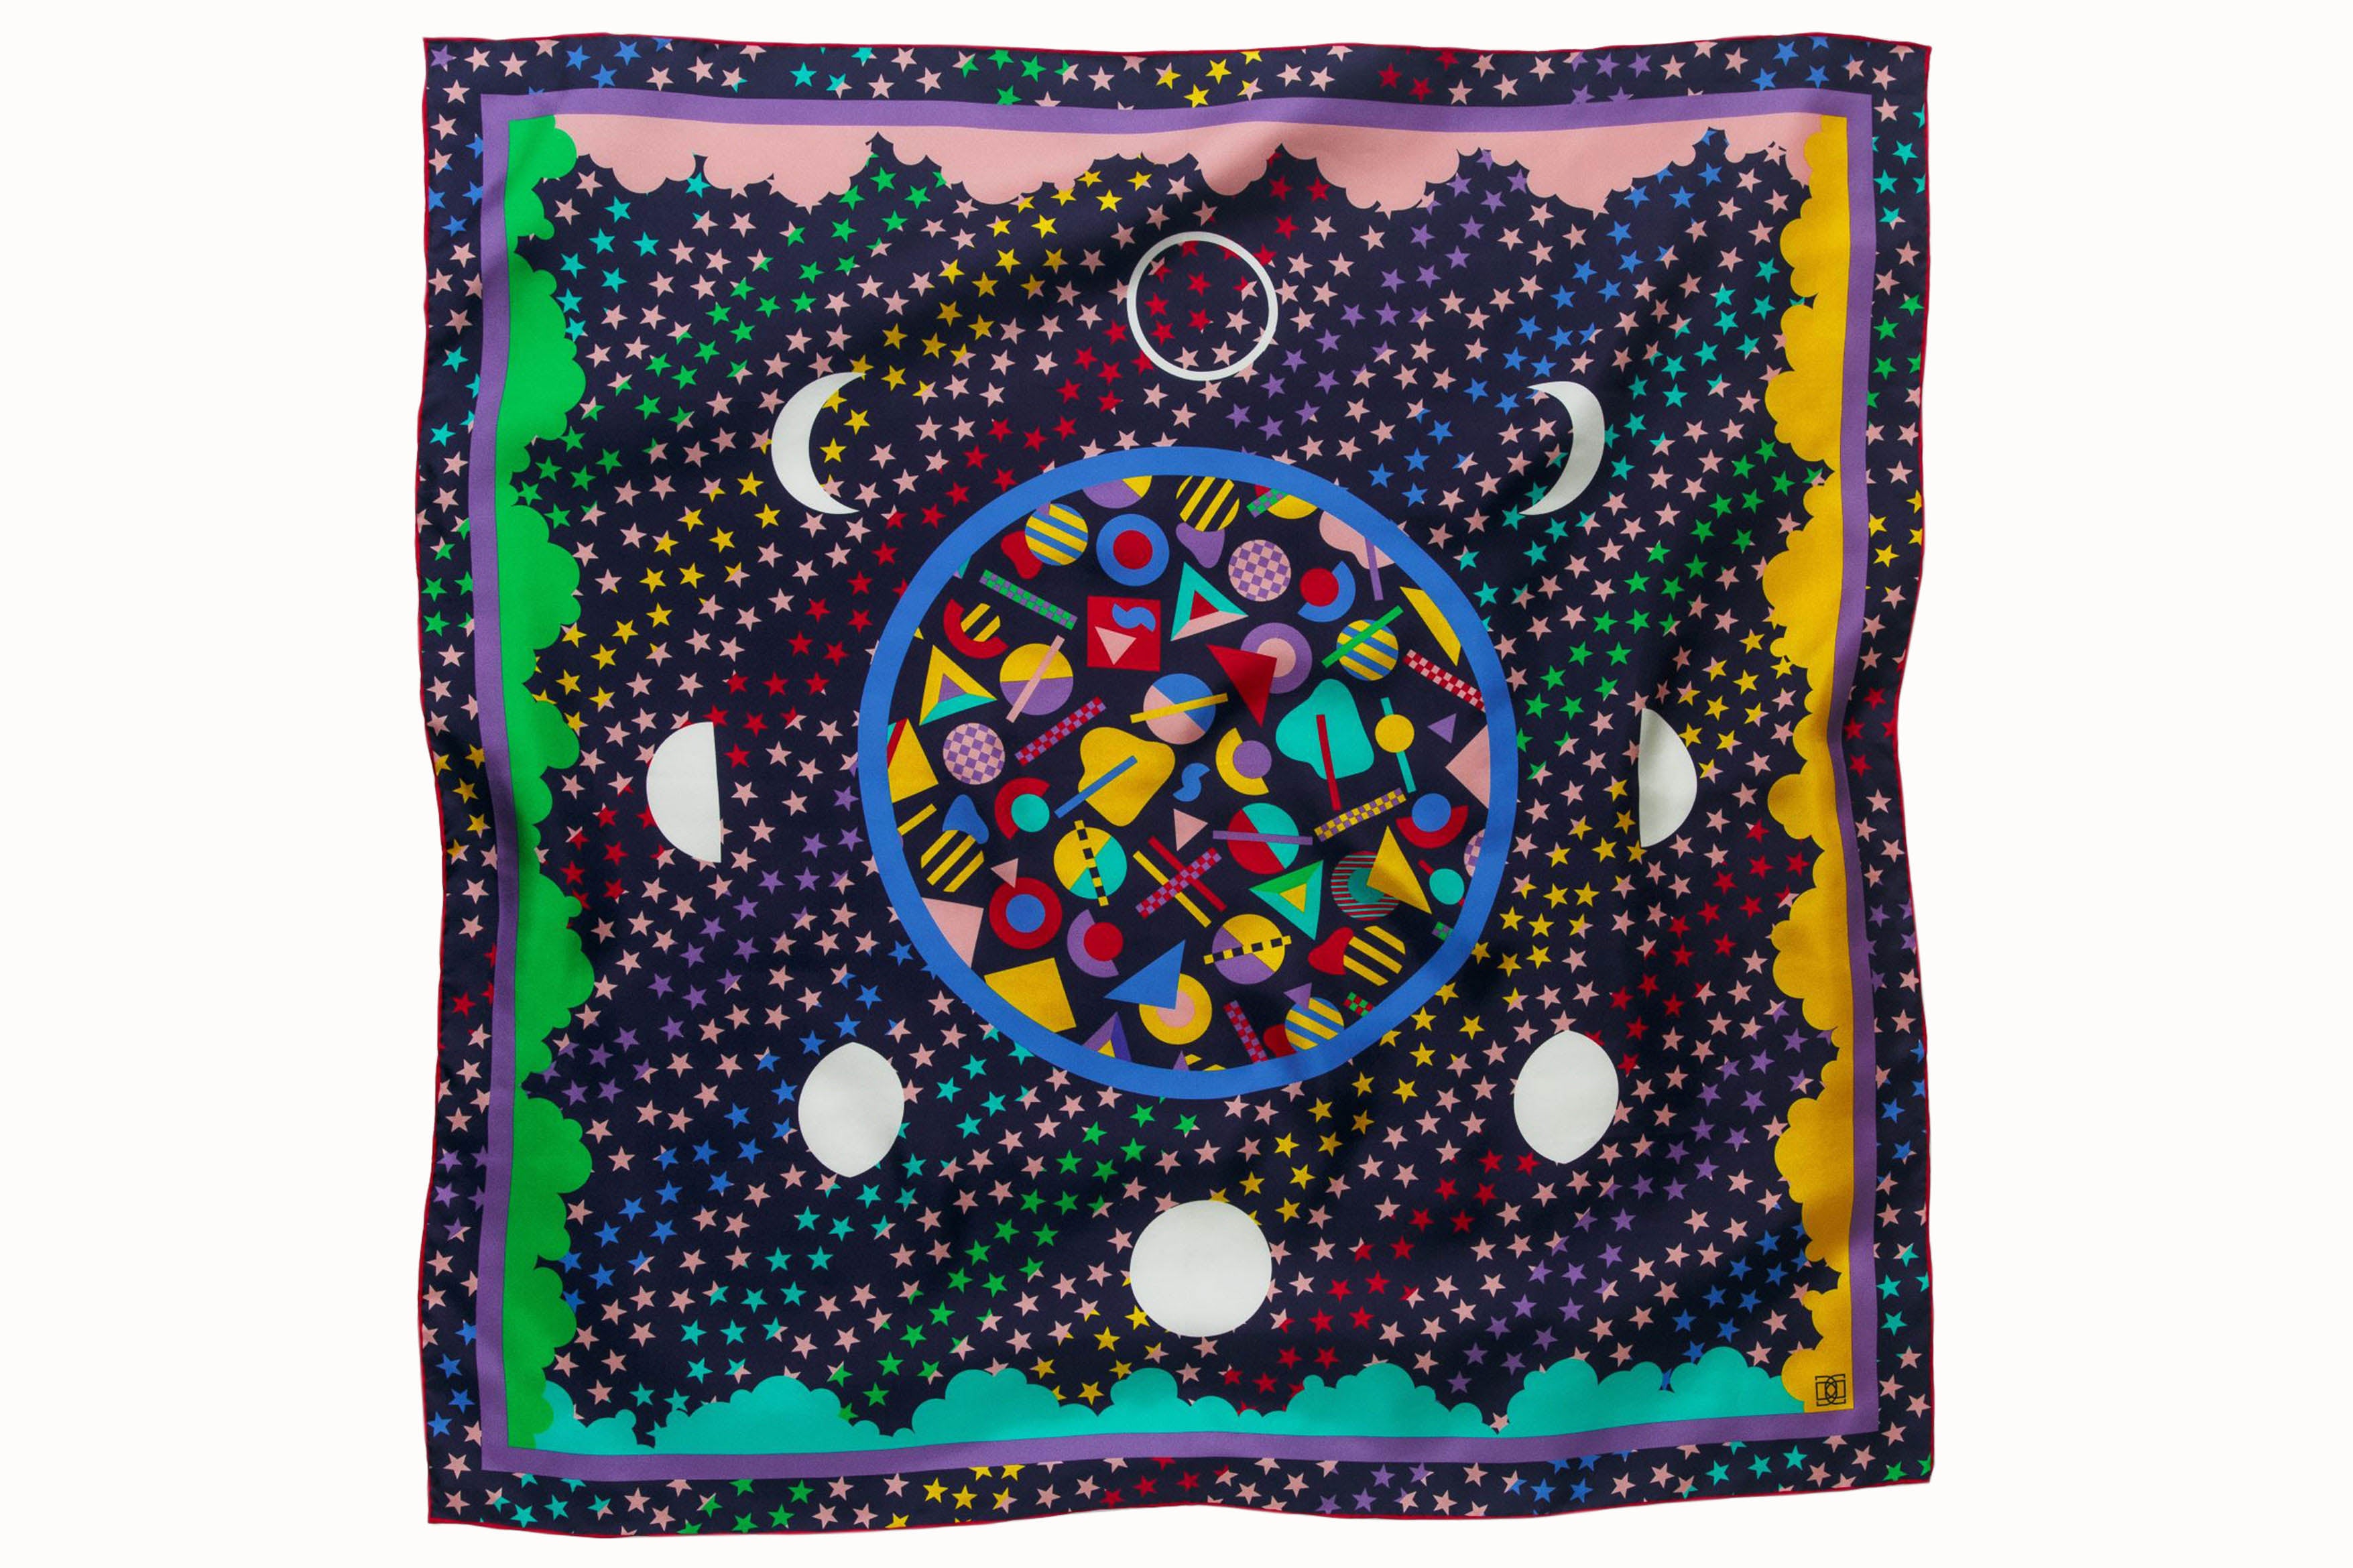 Flatlay image of 100% silk square scarf featuring a motif of brightly colored stars, clouds and white moon phases throughout. The center features colorful geometric shapes as a compliment to the celestial theme.